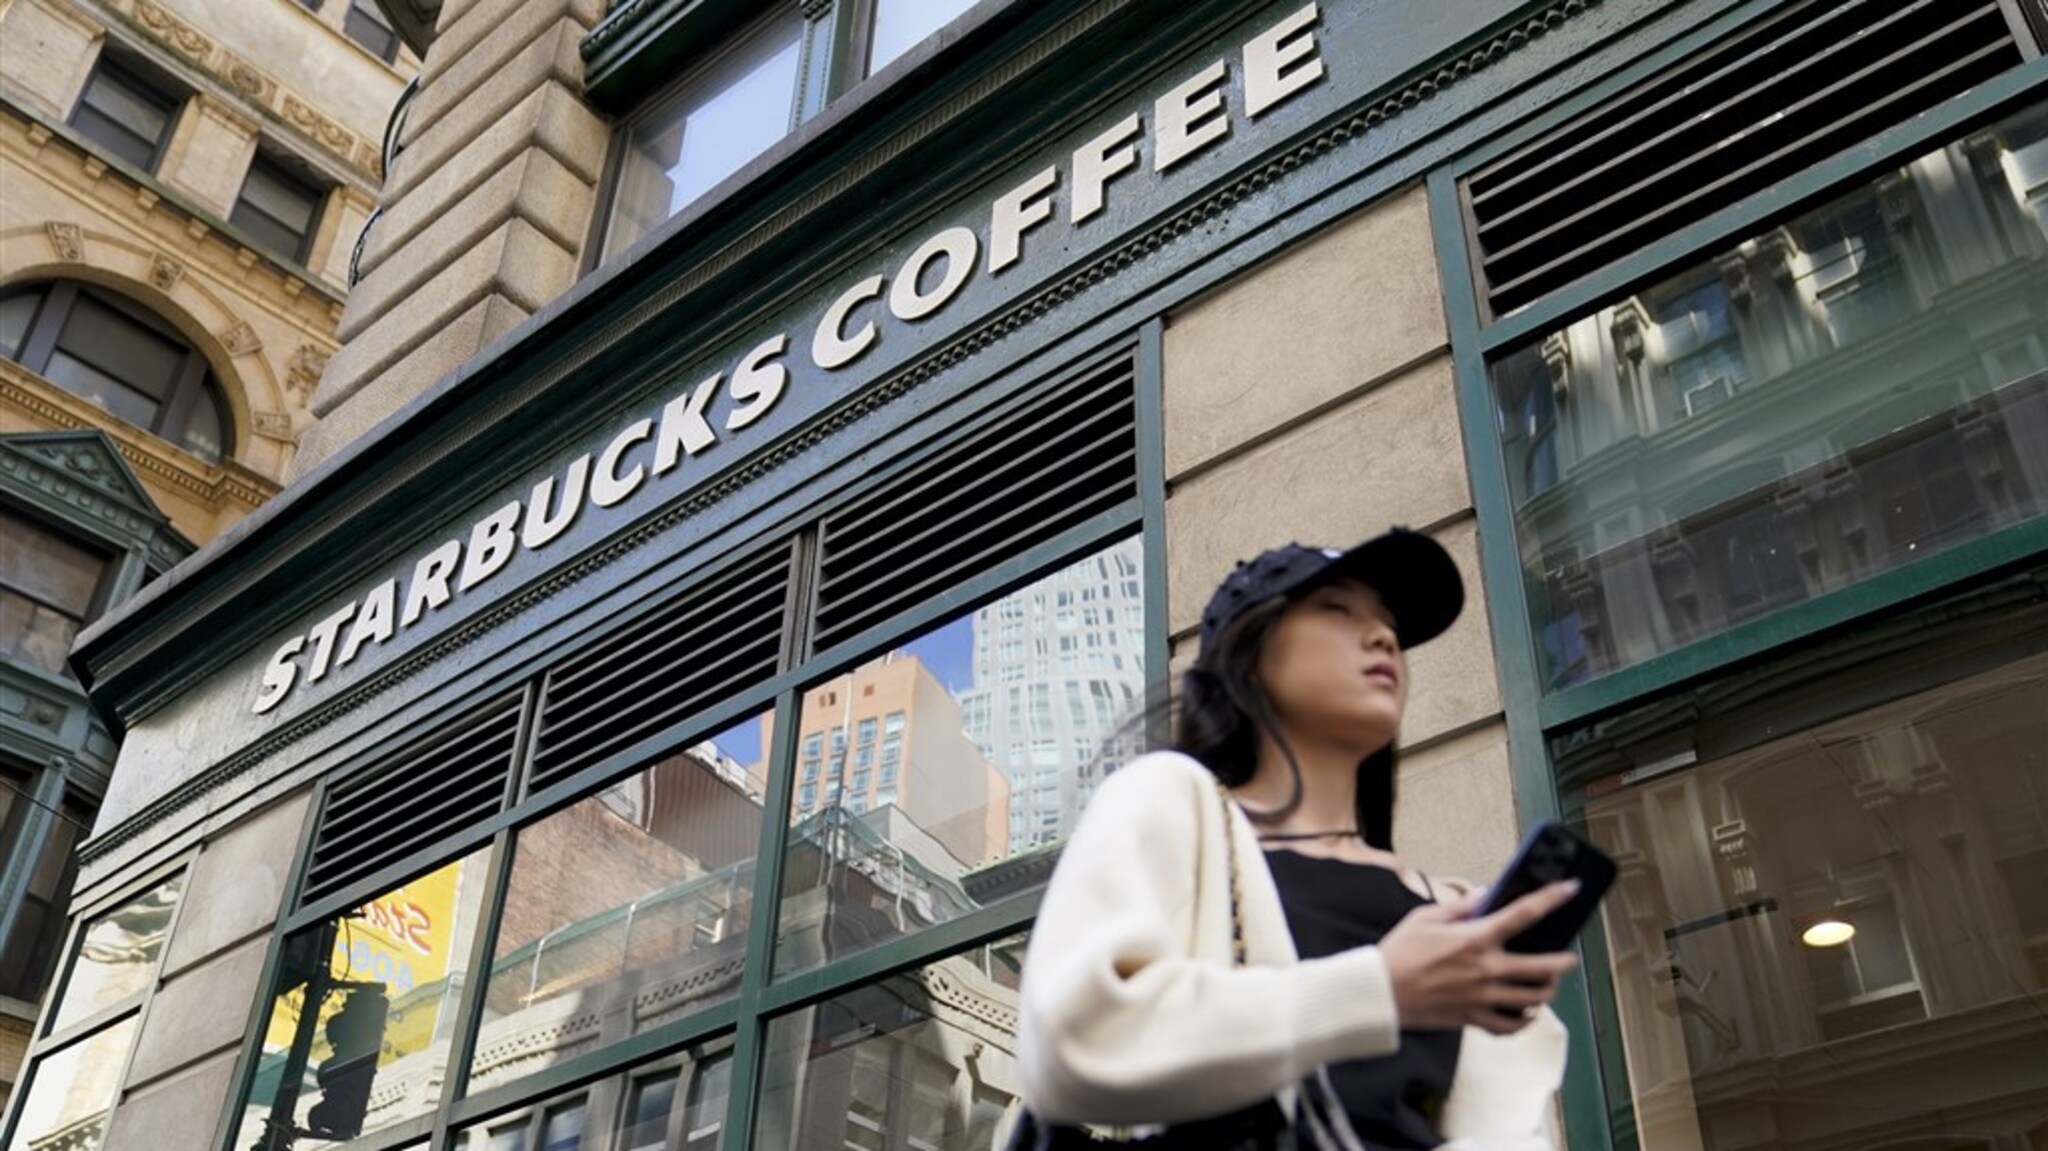 Starbucks fires woman for being white: Damages of $25.6 million